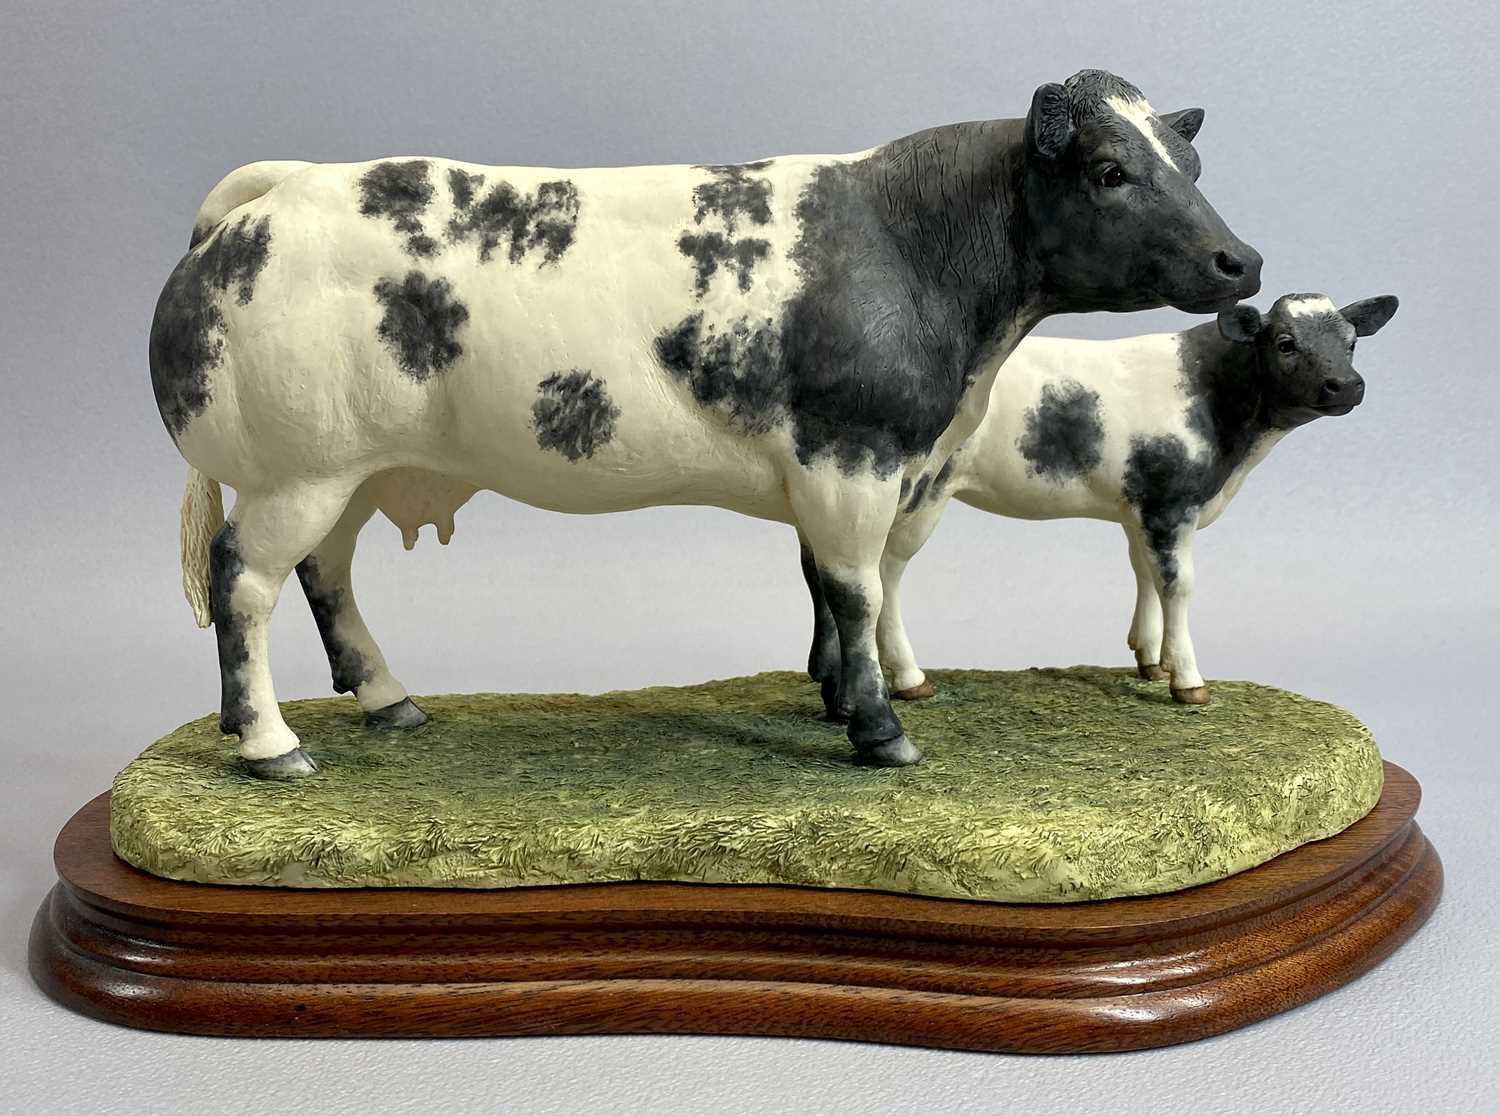 BORDER FINE ARTS FIGURE - Belgian blue cow/calf, B0590, on wooden stand, 18cms H, with certificate